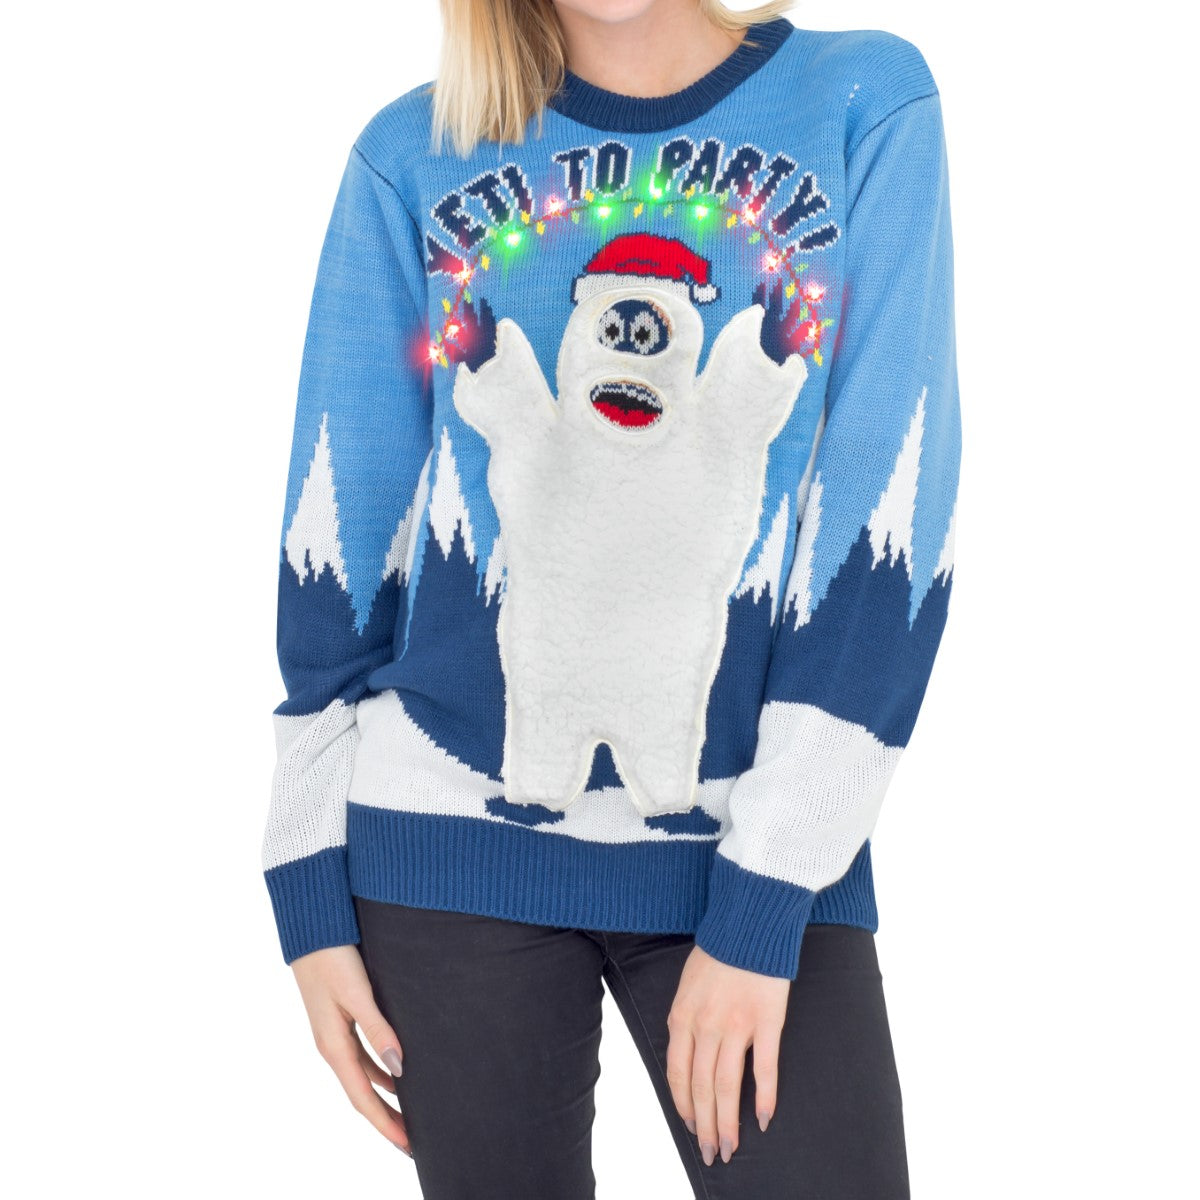 Let it Snow Light Up Plus Size Ugly Christmas Sweater: Women's